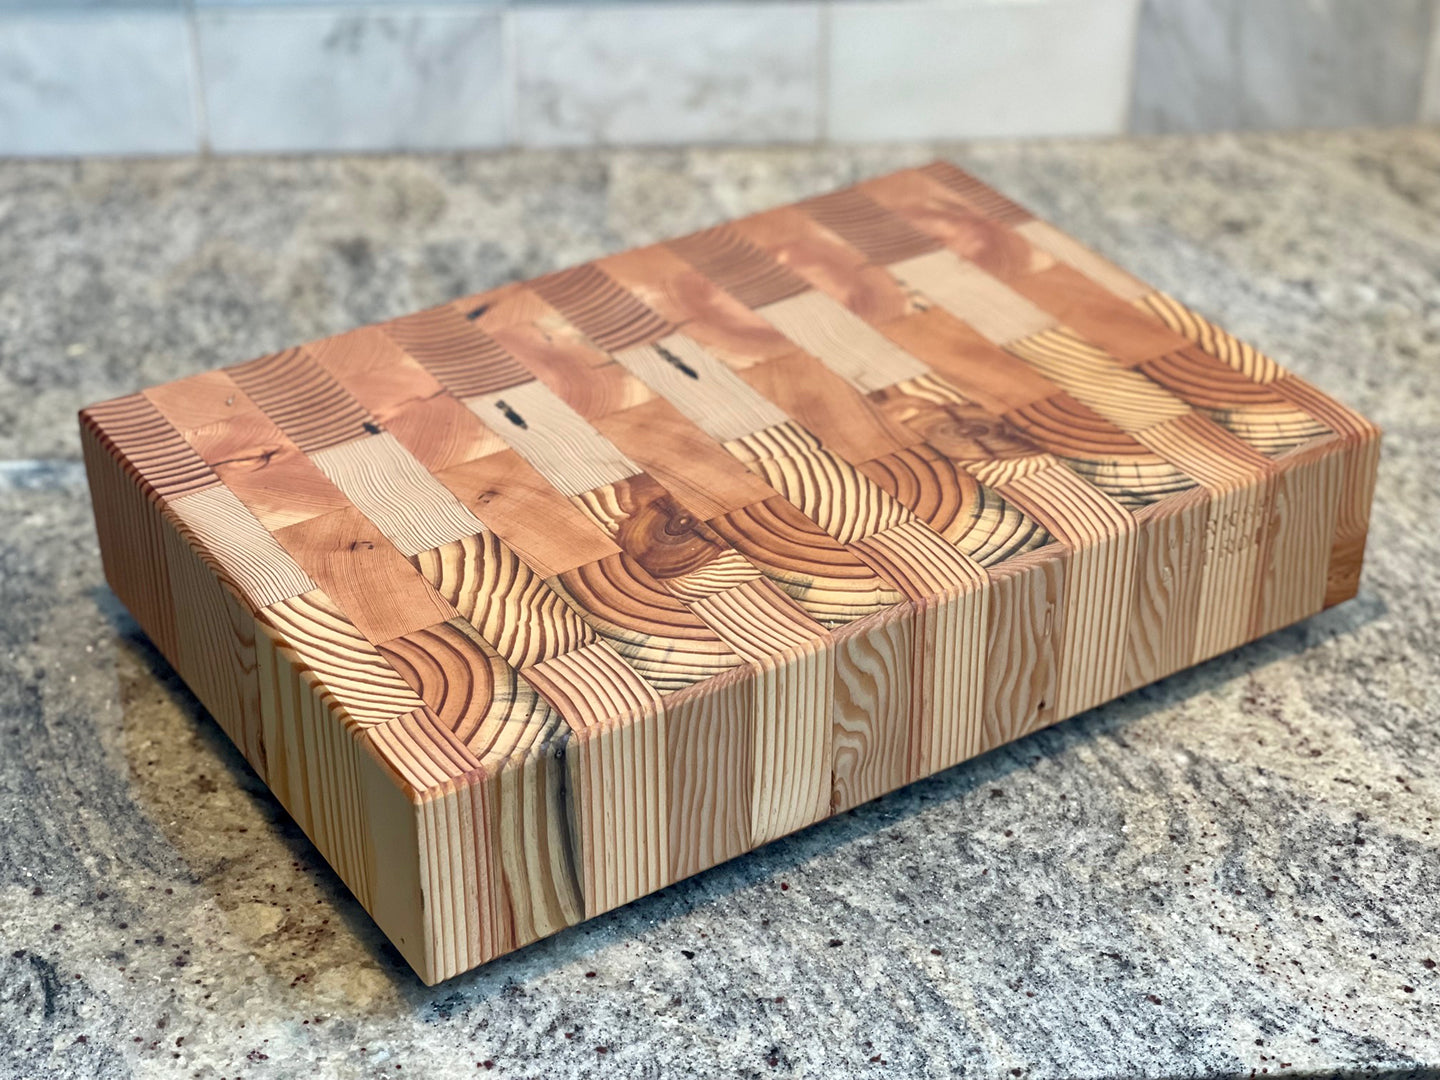 Pine Wood Chopping Board for Kitchen, Pine Wood